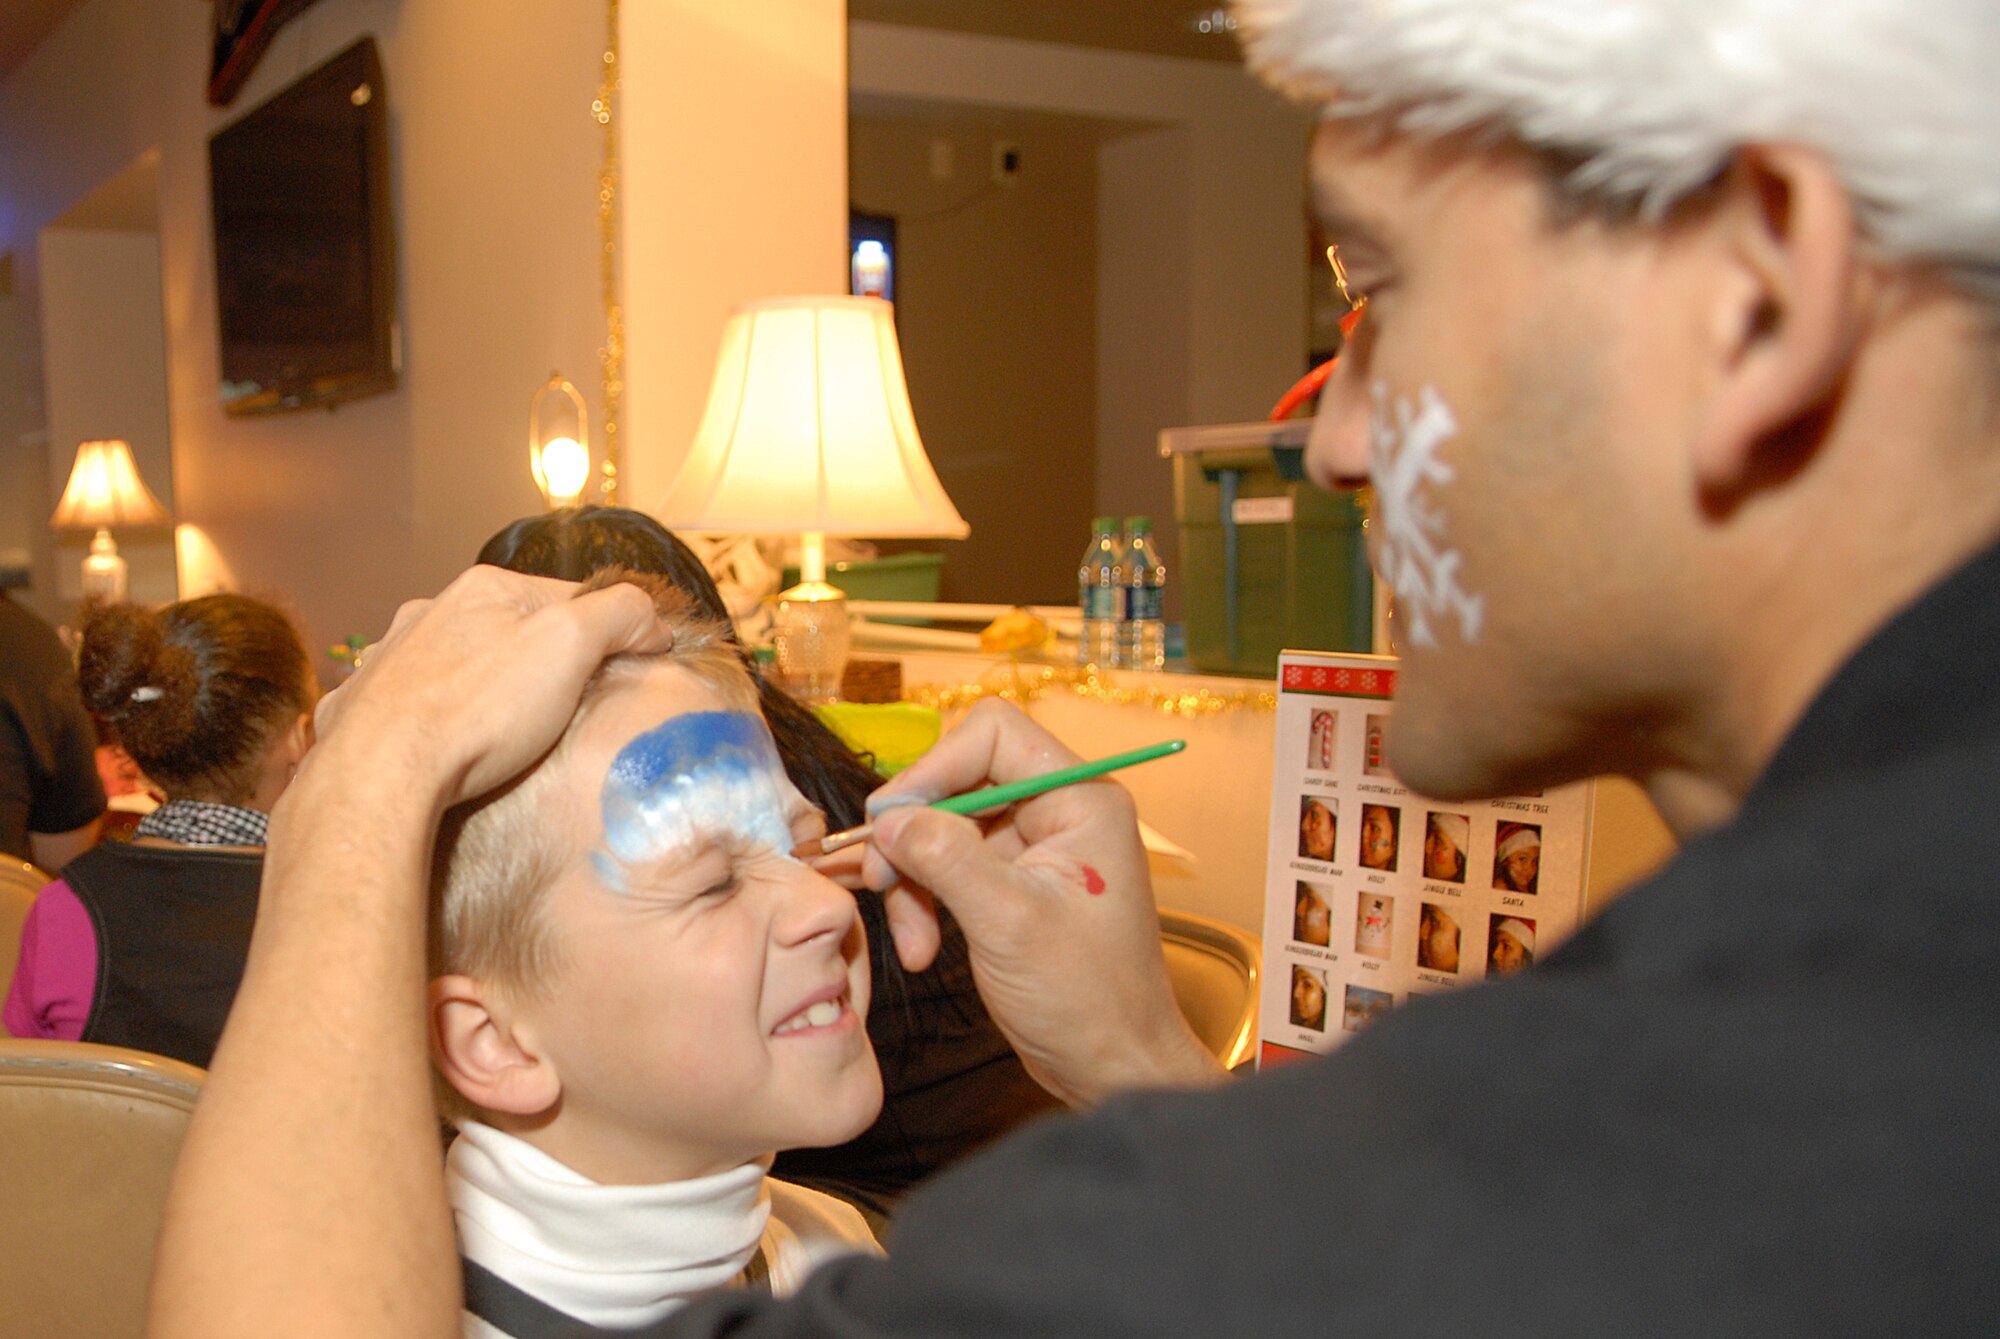 VANDENBERG AIR FORCE BASE, Calif. -- Justin Bryant, the son of Master Sgt. Alexander Bryant, 30th Logistics Readiness Squadron, gets the warrior paint at the Pacific Coast Club during the Breakfast With Santa event here Saturday, Dec. 18, 2010.  Team V families celebrated the holidays with breakfast, crafts and games.  (U.S. Air Force photo/Senior Airman Andrew Satran) 

 